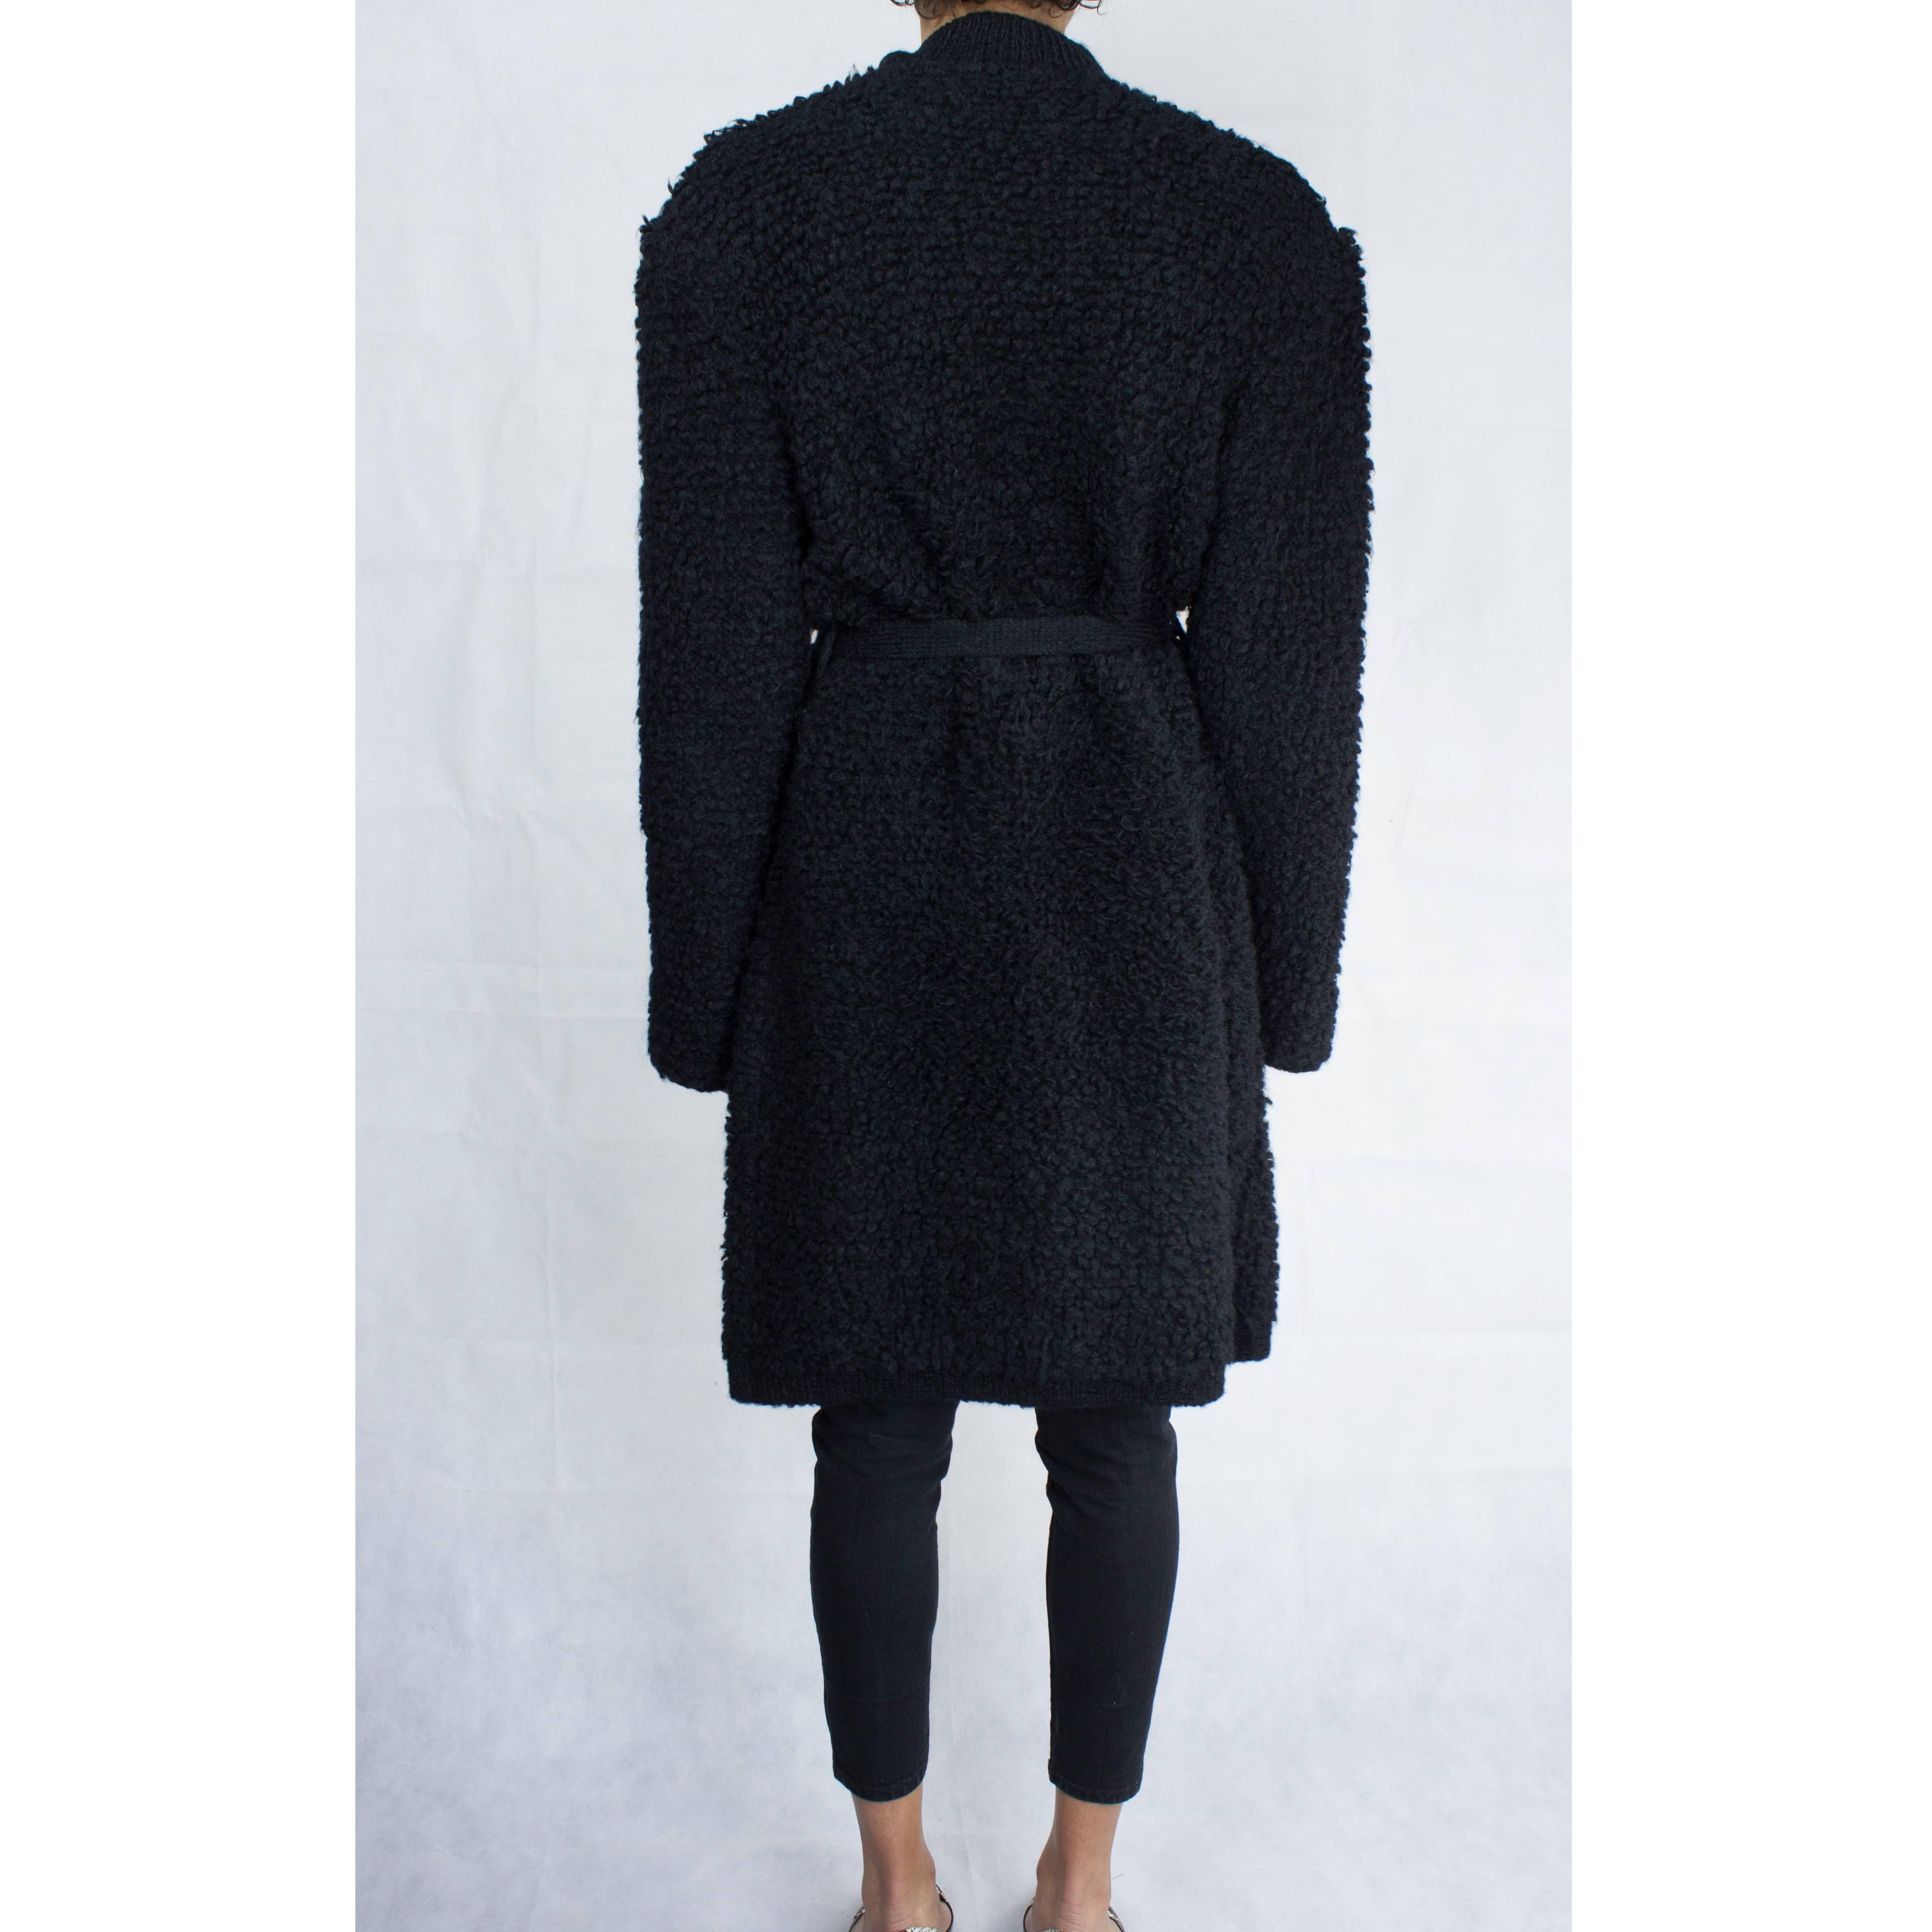  Sonia Rykiel  quintessentially French black knitted wool coat, circa 1960s In Good Condition For Sale In London, GB